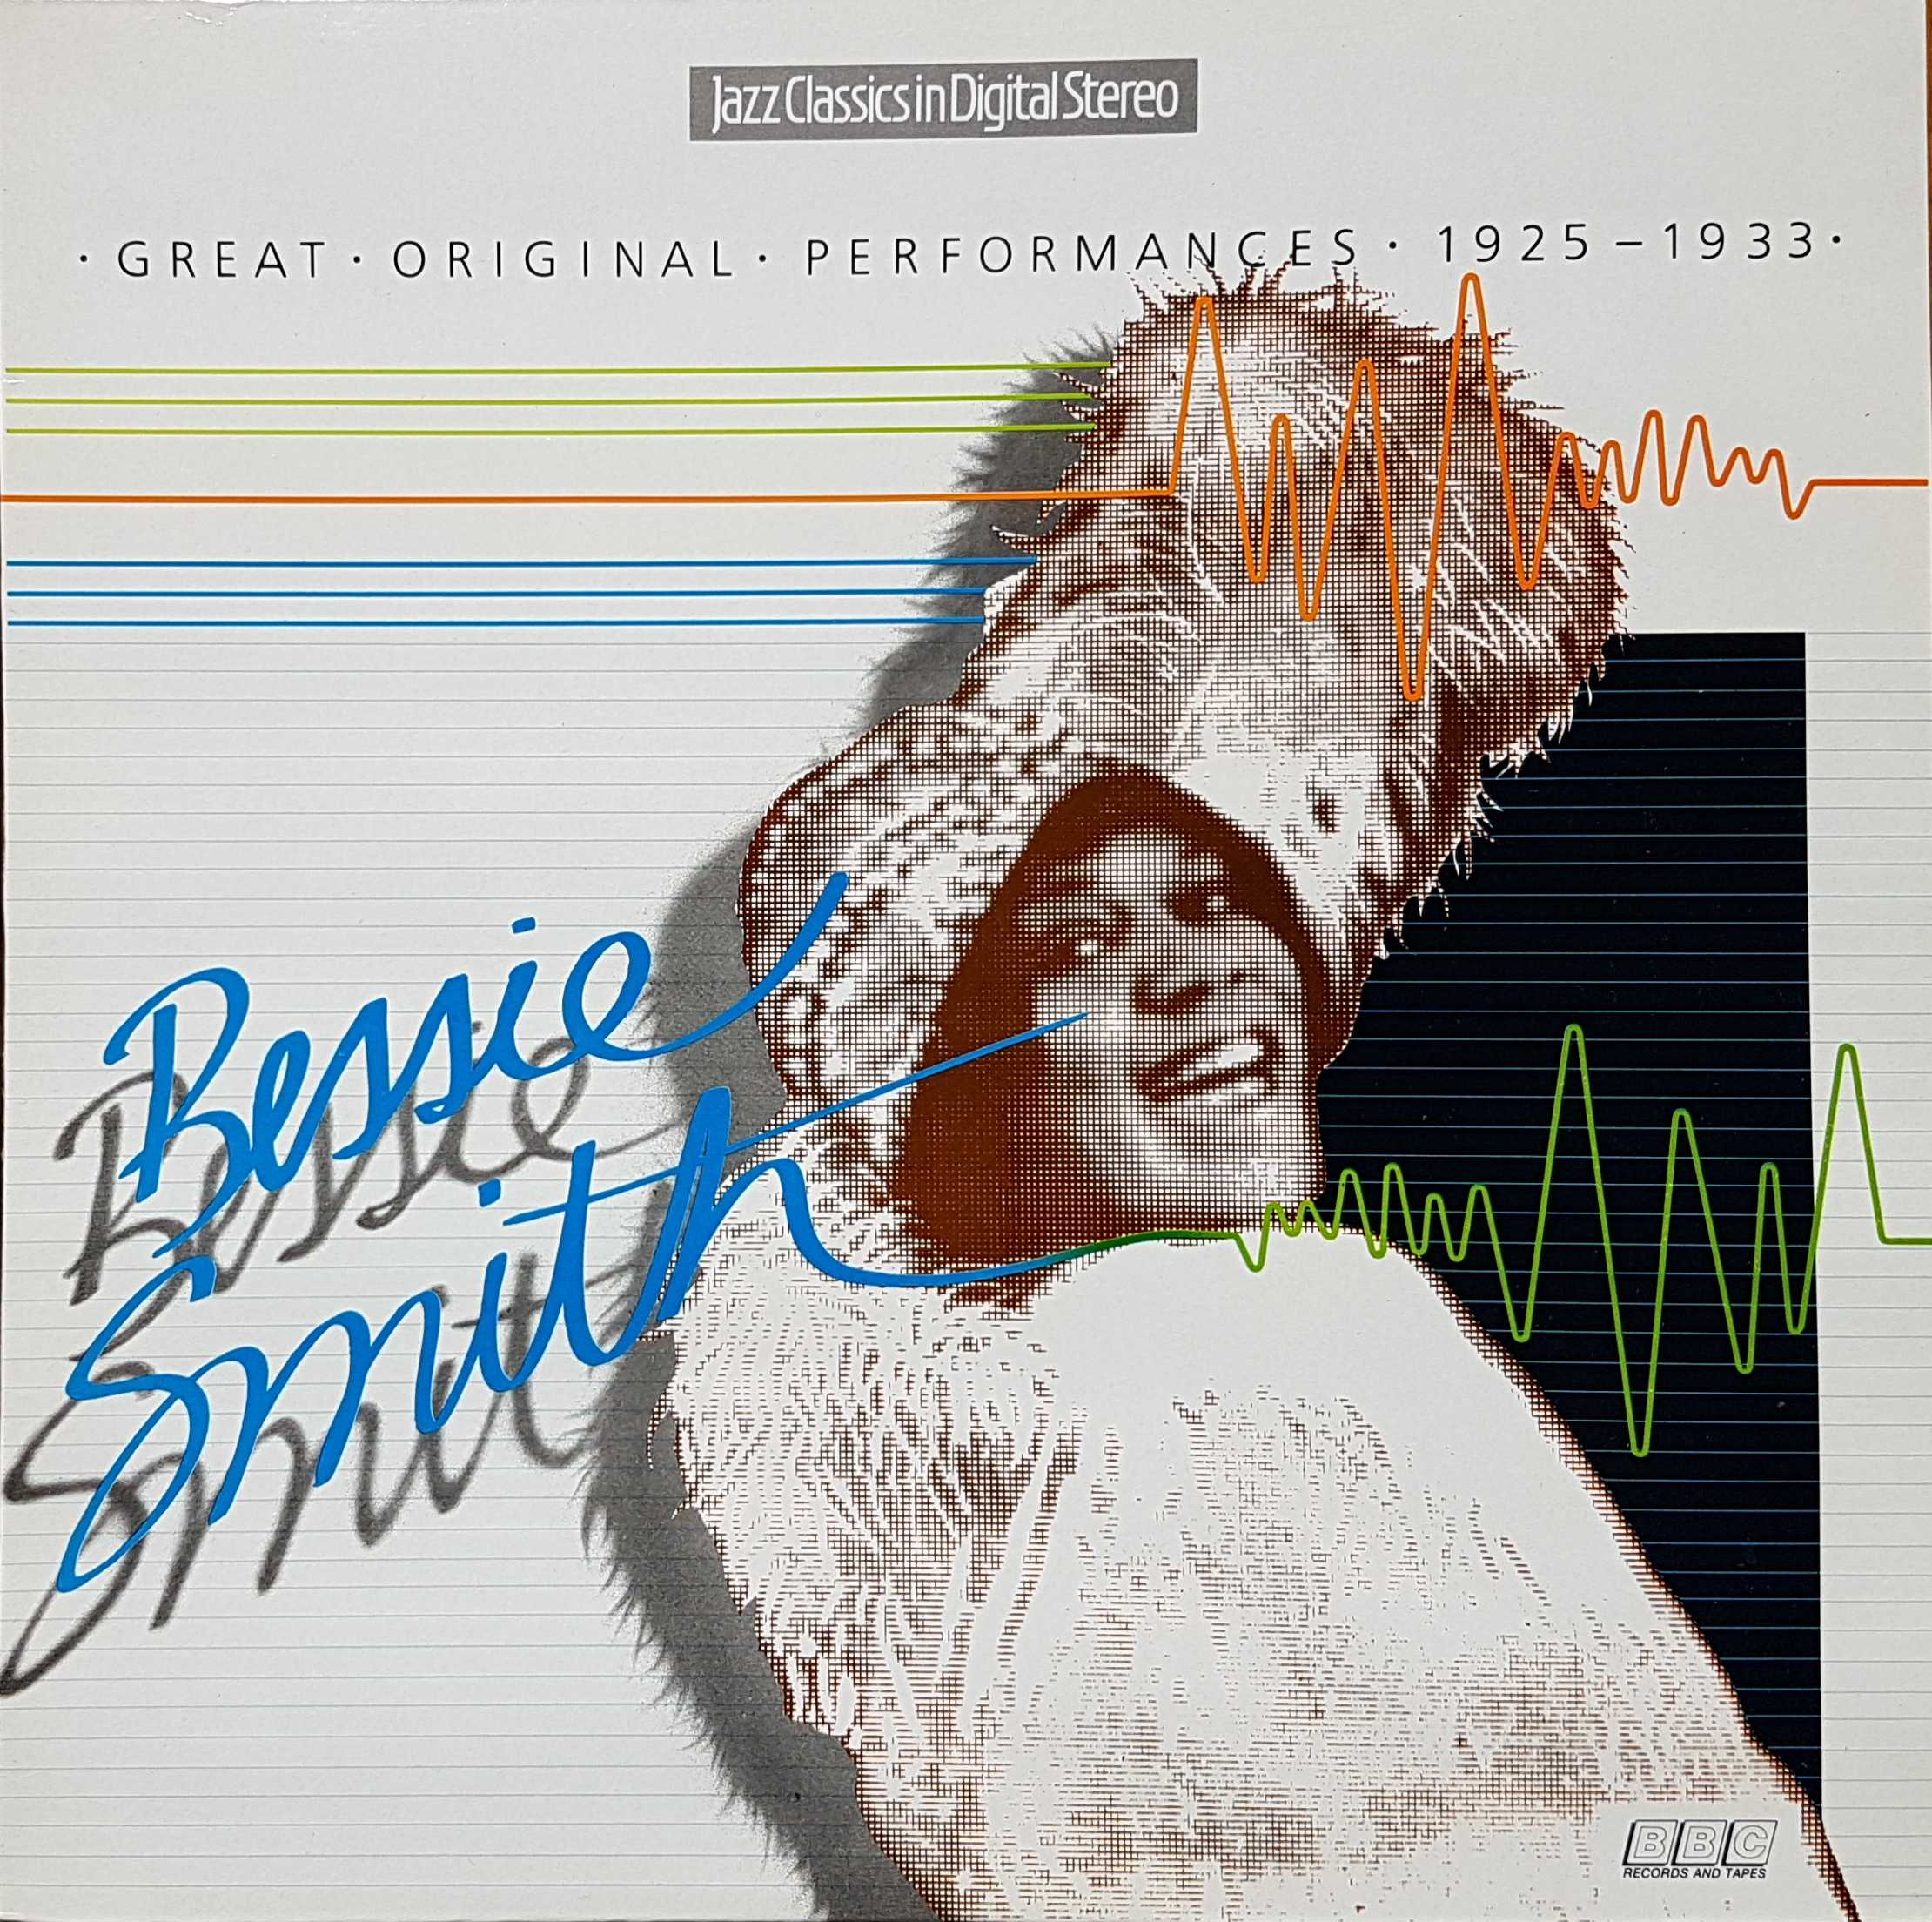 Picture of REB 602 Jazz Classics - Bessie Smith by artist Bessie Smith from the BBC albums - Records and Tapes library